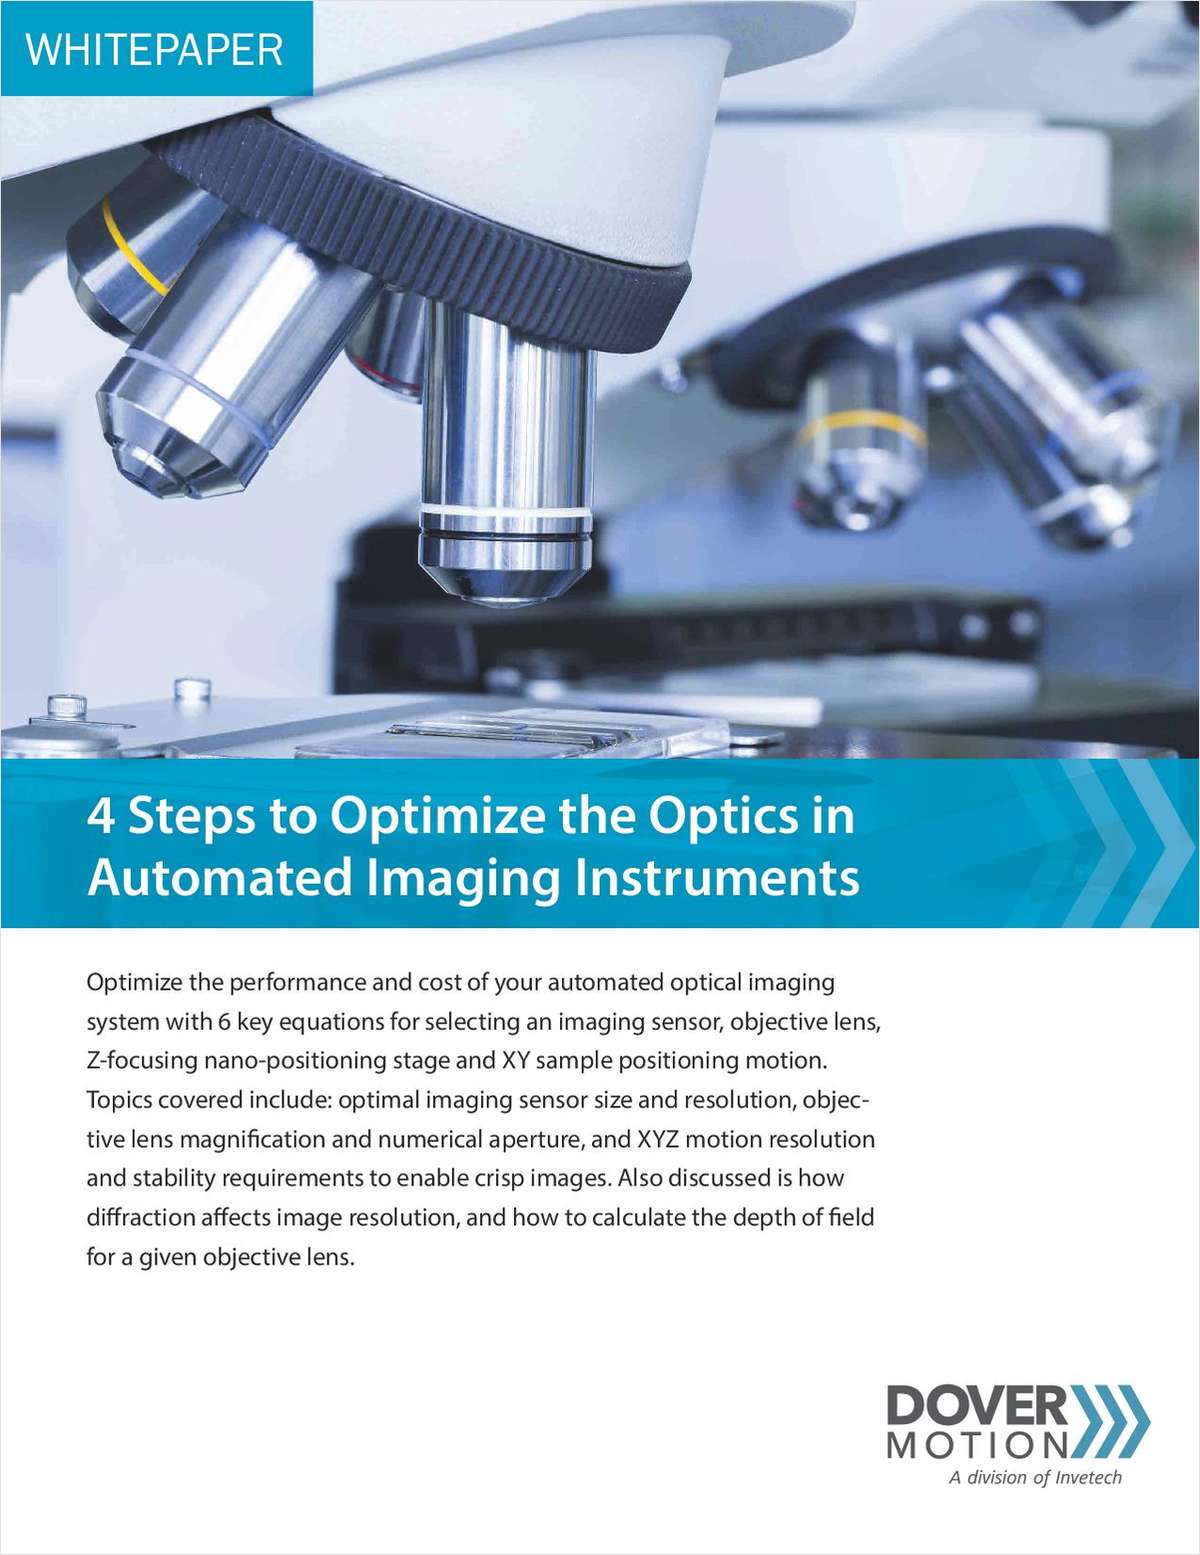 Four Steps to Optimize the Optics in Automated Imaging Instruments